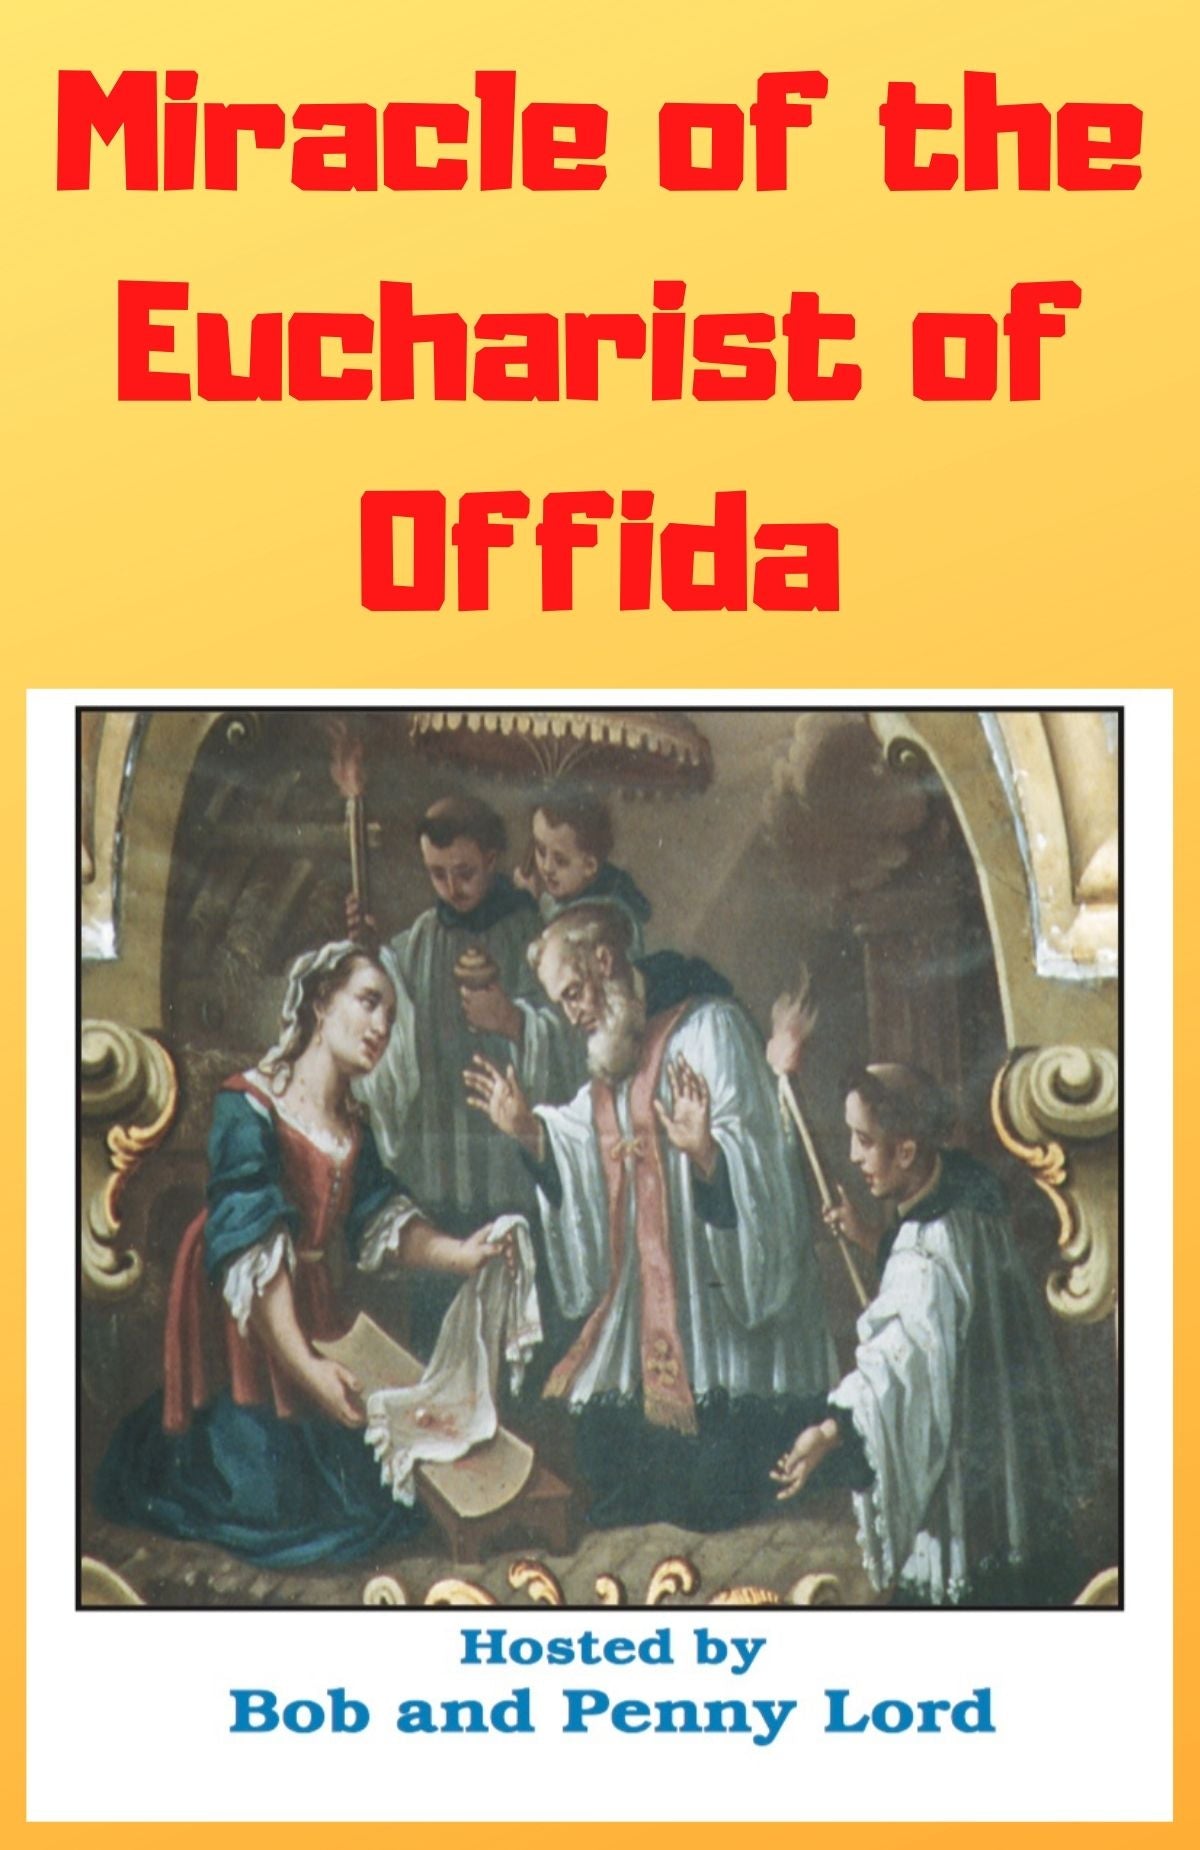 Miracles of the Eucharist Book 1 ebook PDF - Bob and Penny Lord